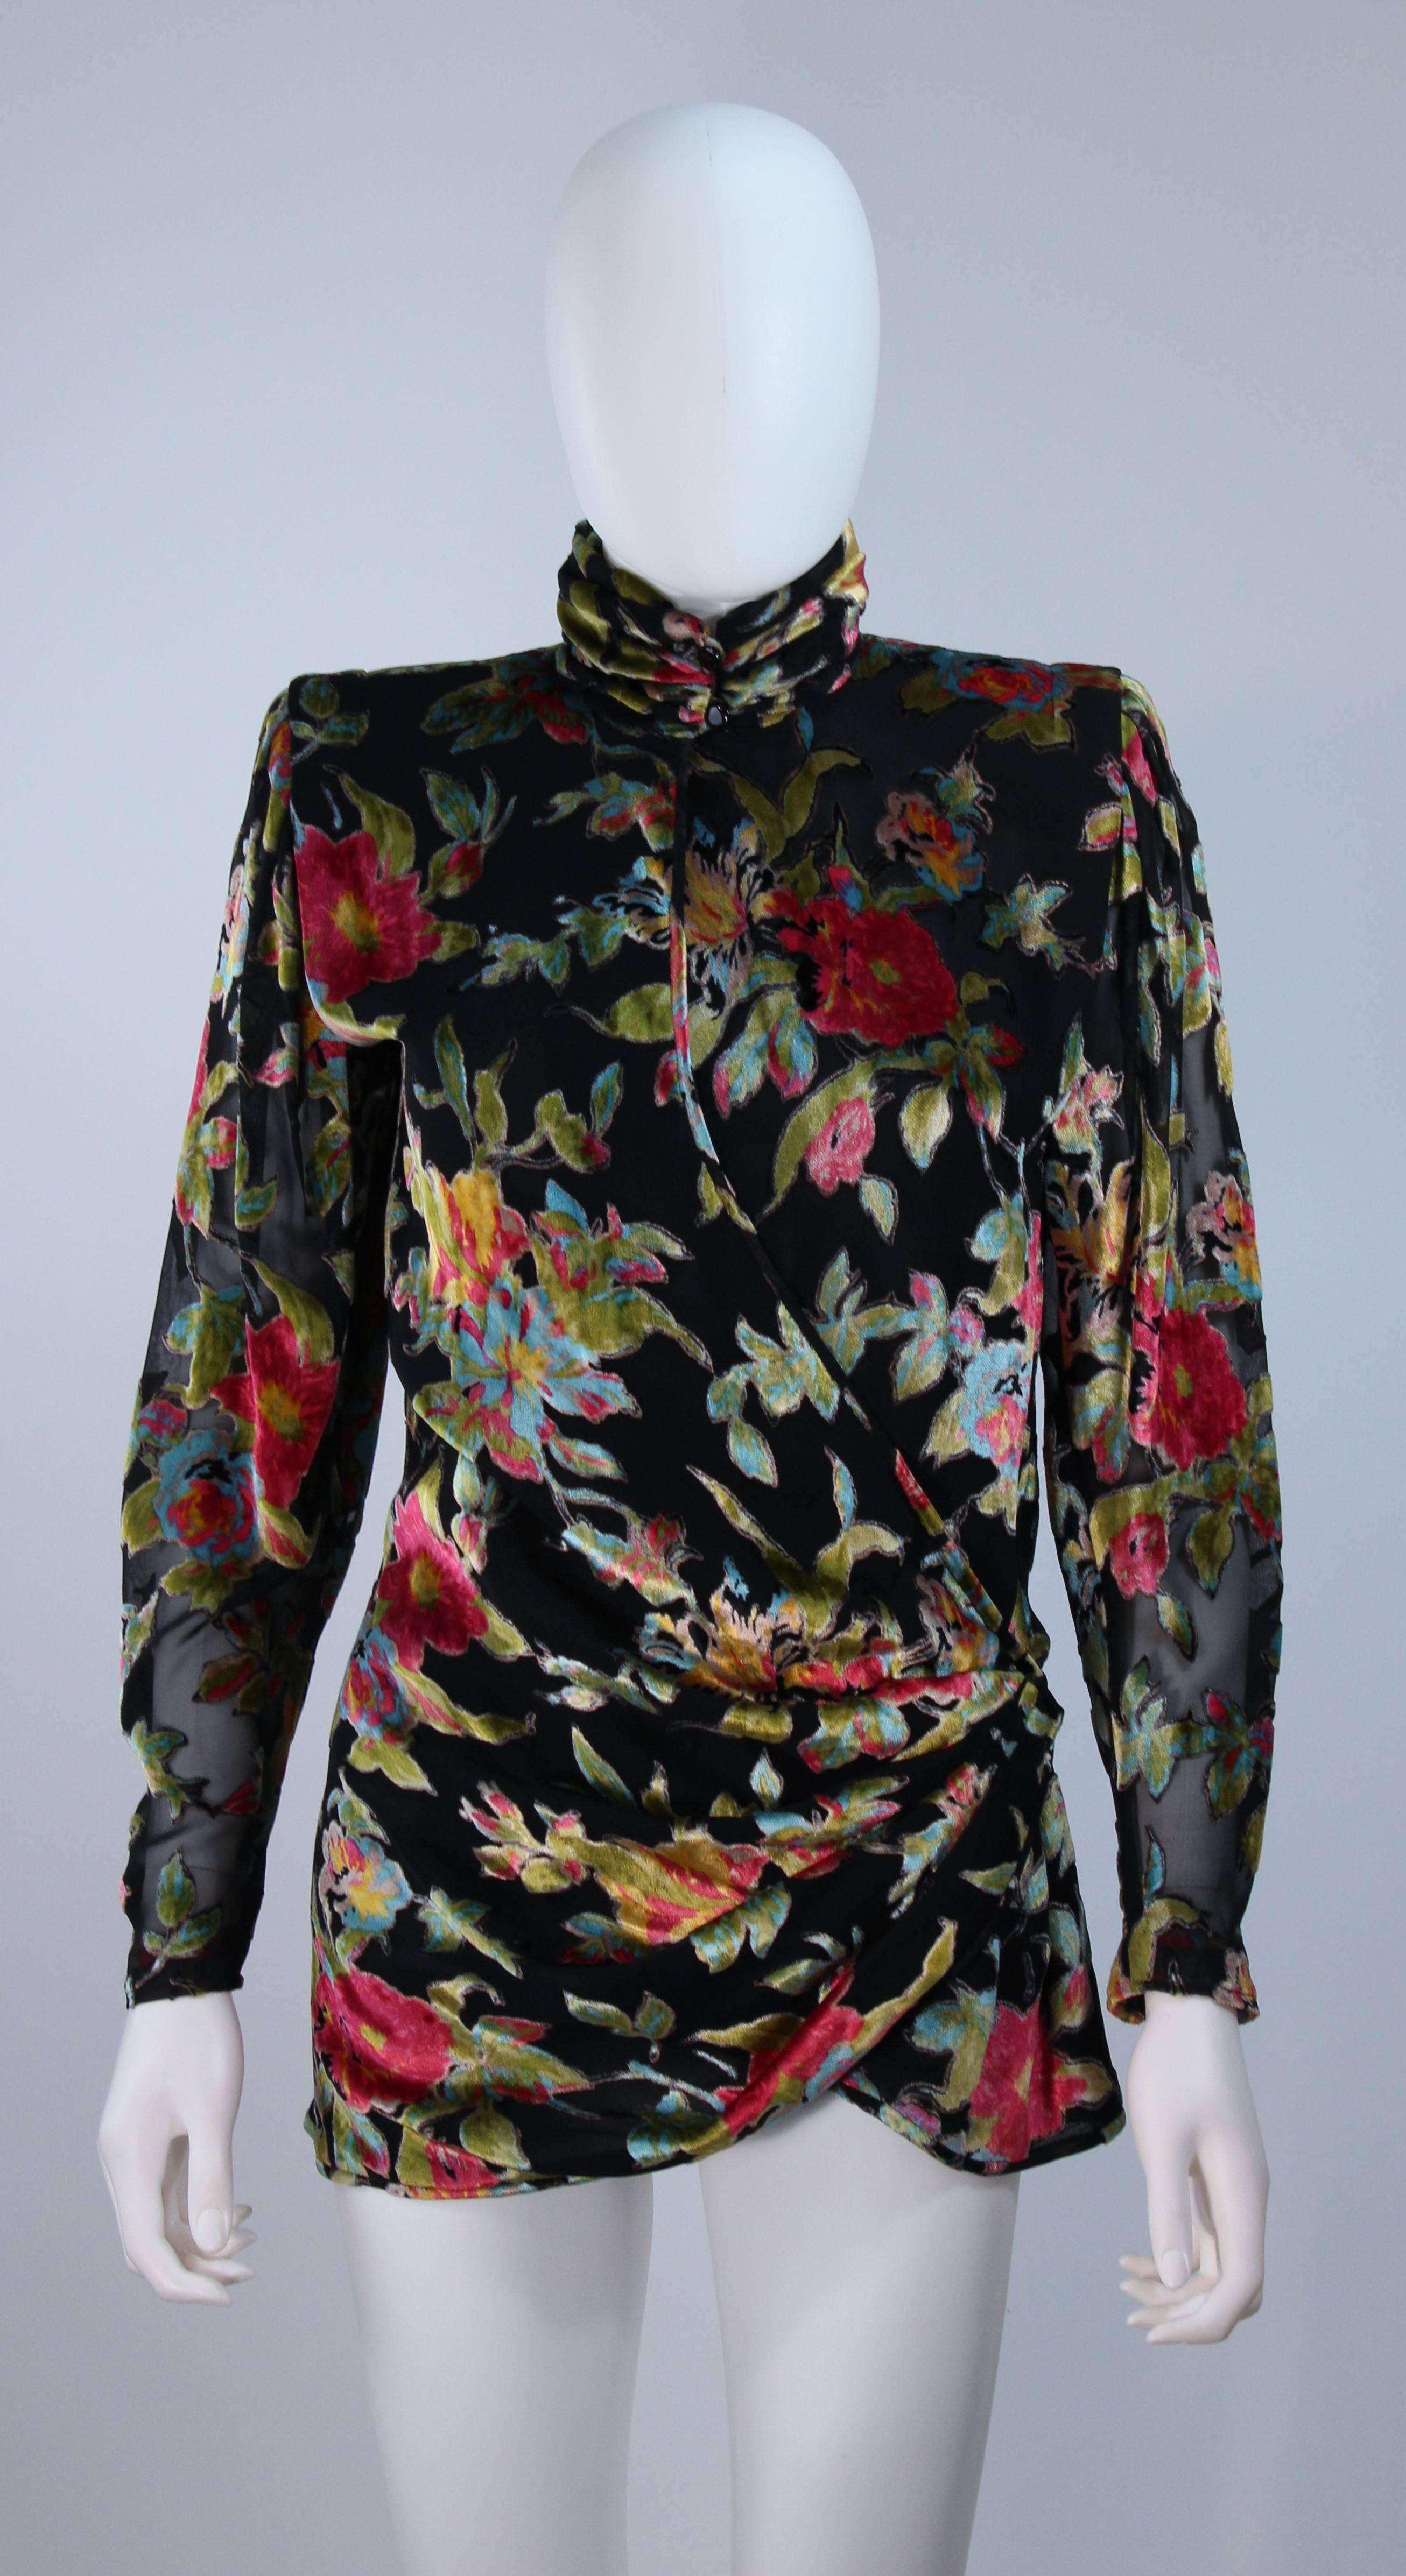  This Ungaro blouse is composed of a silk chiffon and velvet combination with a floral motif in hues of reds, greens, and blues. Features a mock style neckline with center front closures and interior tie. In excellent vintage condition. 

 